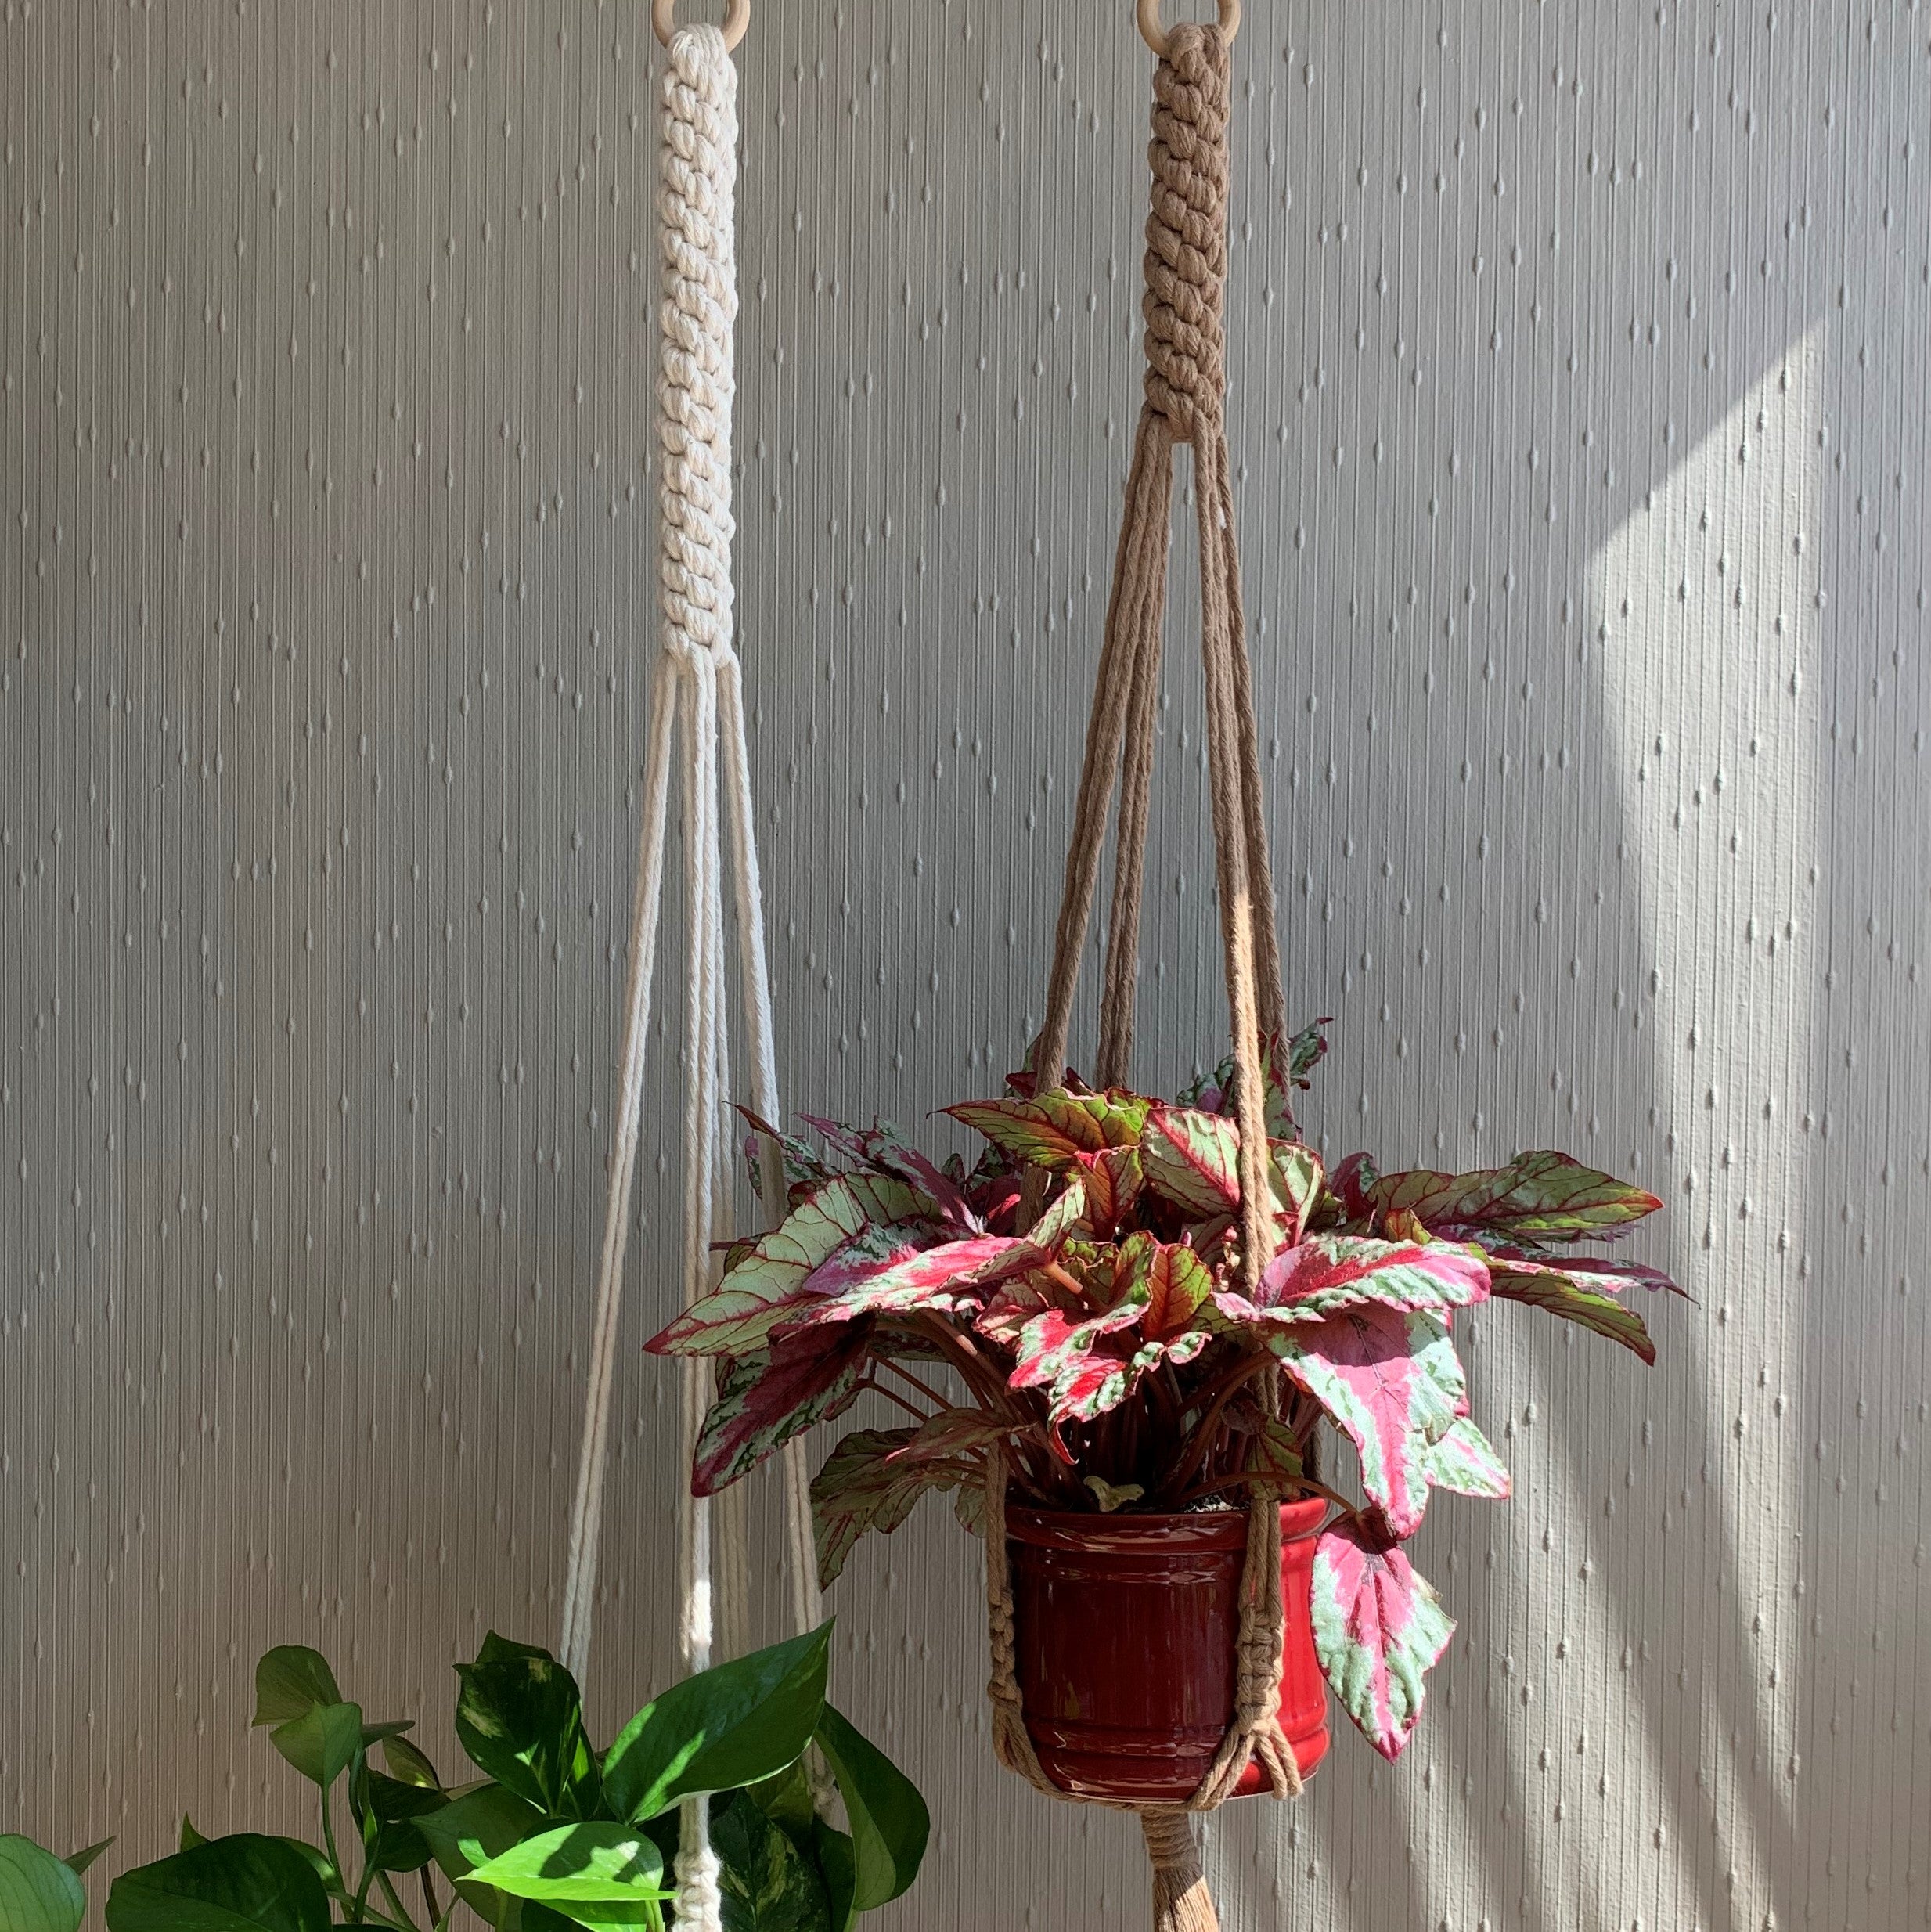 A brown and a white macrame plant hanger with indoor plants in pots hanging from the ceiling